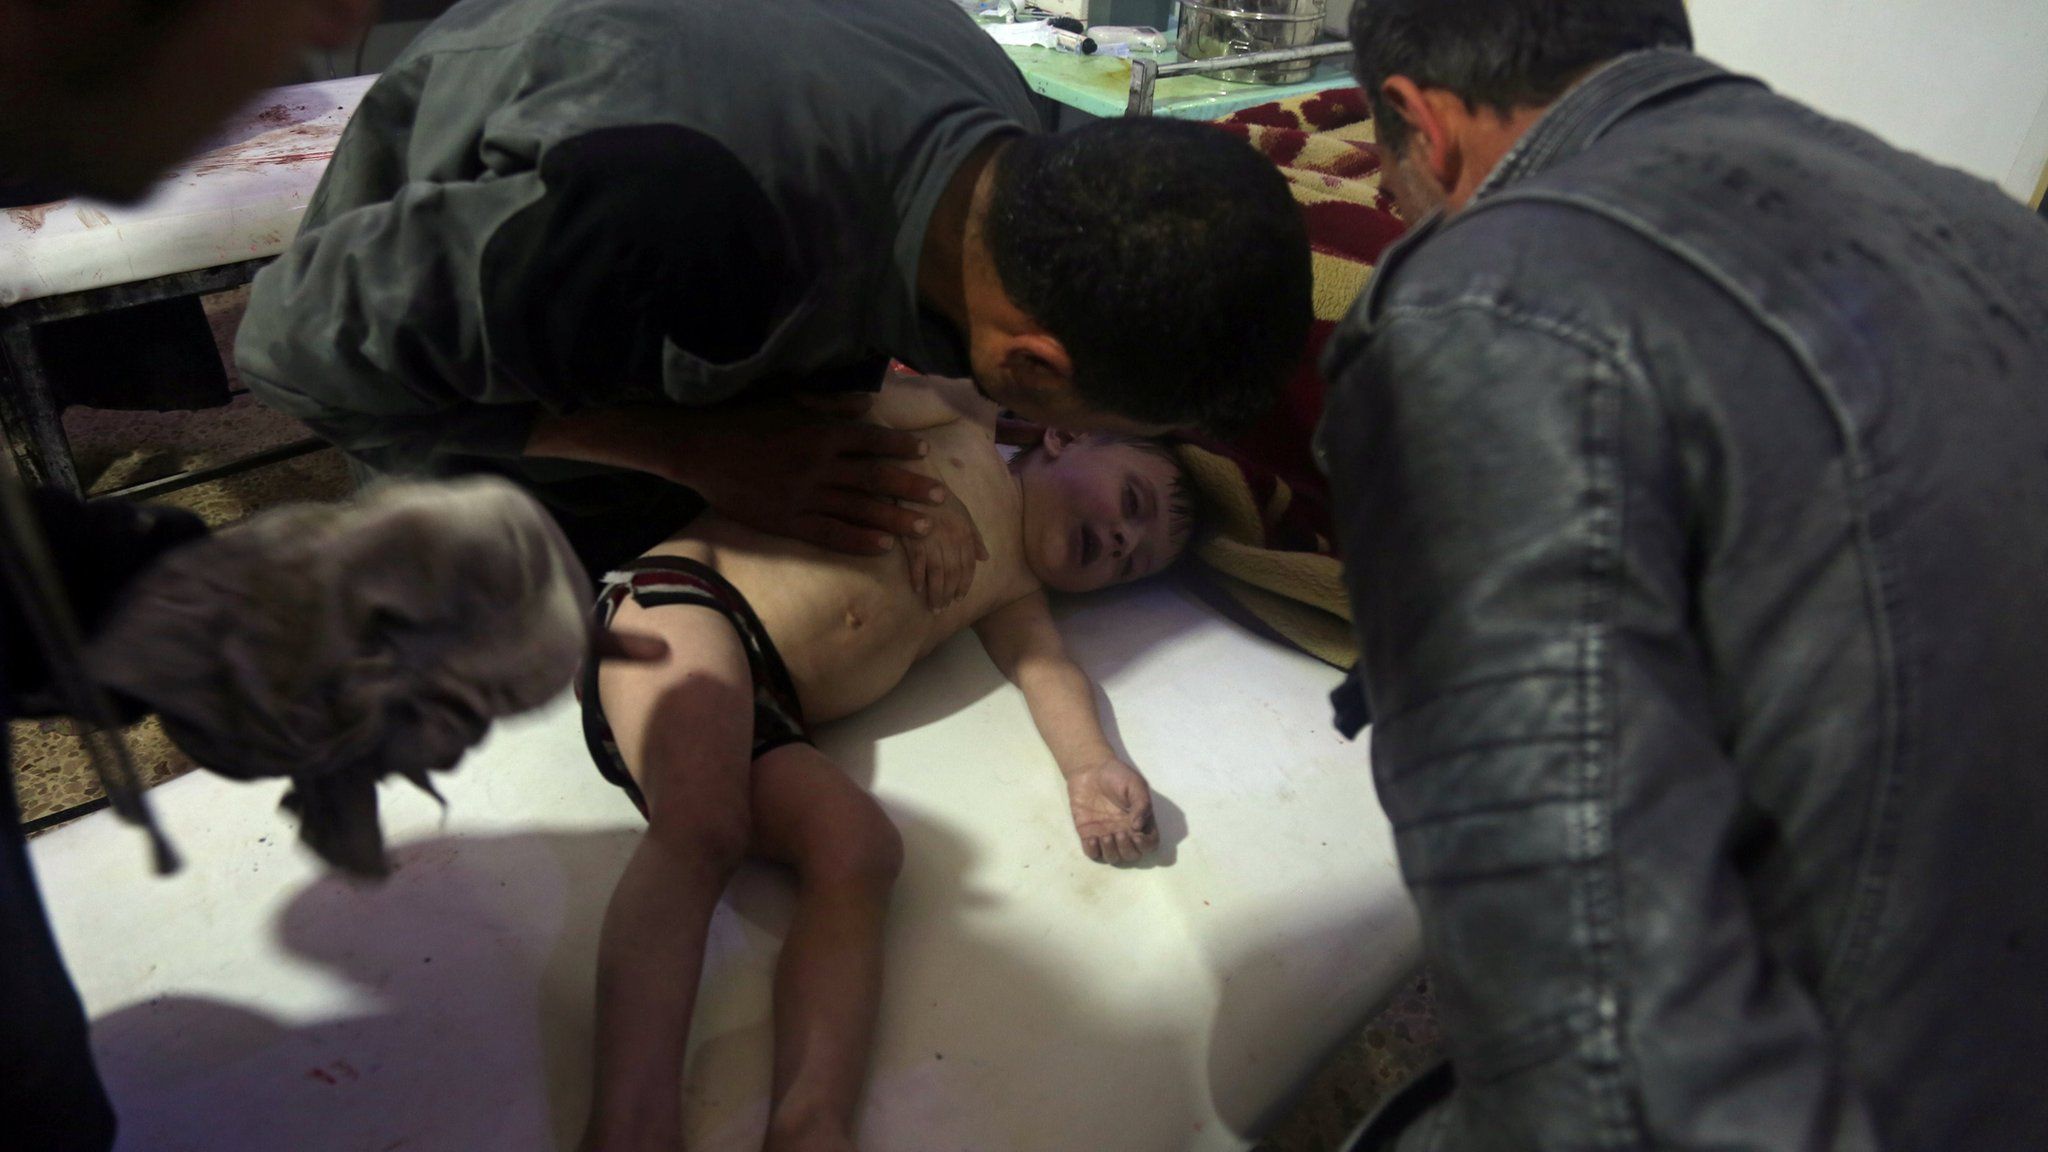 A child is treated in a hospital in Douma, eastern Ghouta in Syria, after what a Syria medical relief group claims was a suspected chemical attack April, 7, 2018.